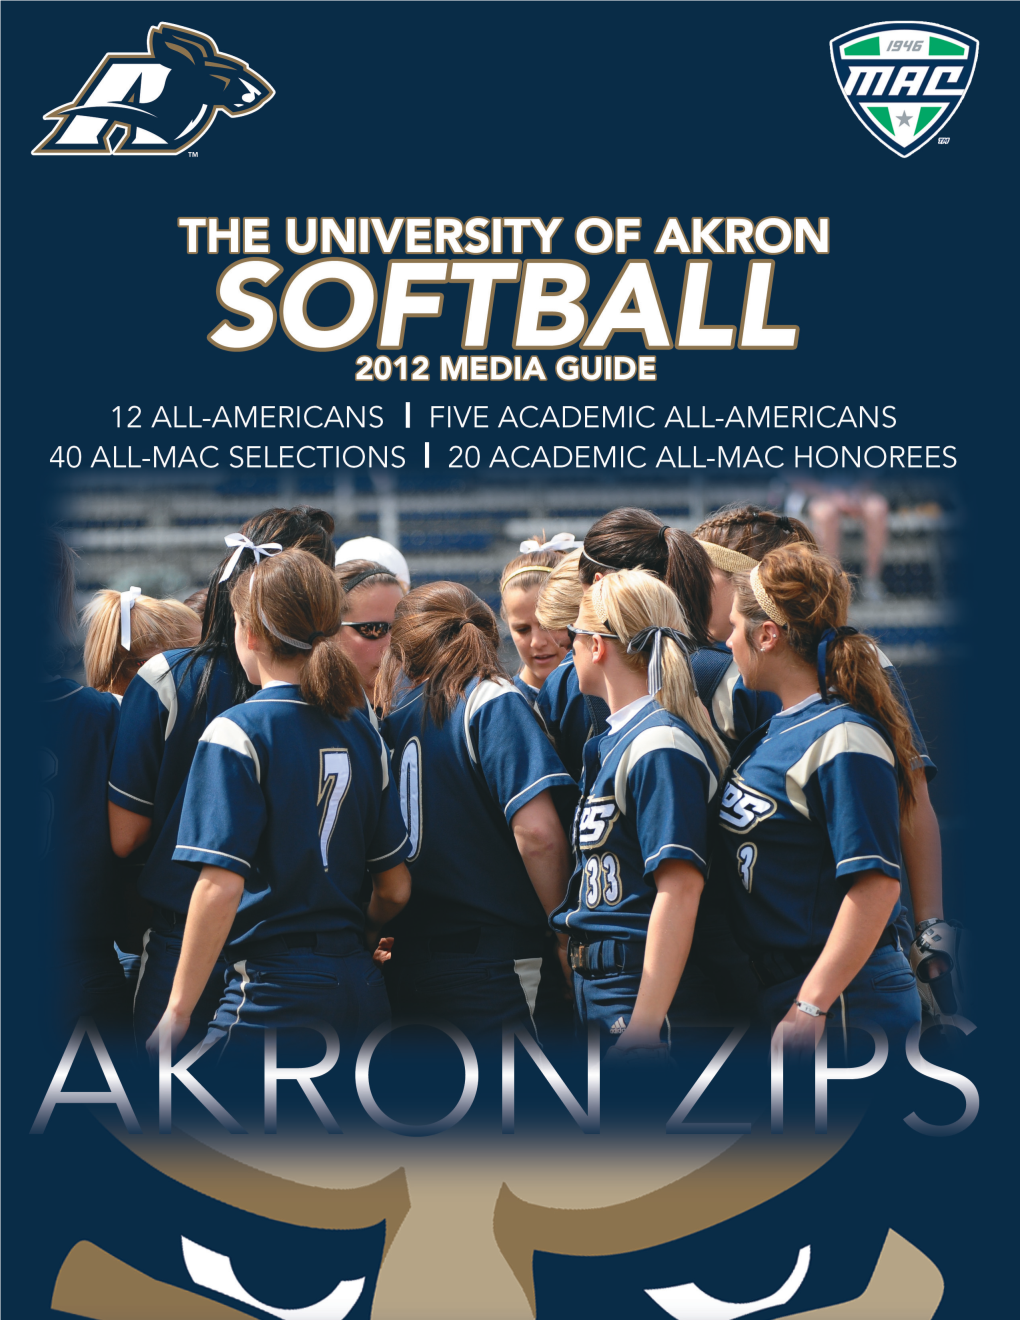 AKRON ZIPS THIS IS AKRON SOFTBALL 1 – THIS IS AKRON SOFTBALL What Is a Zip? 1 Quick Facts 2 Schedule 2 Lee R